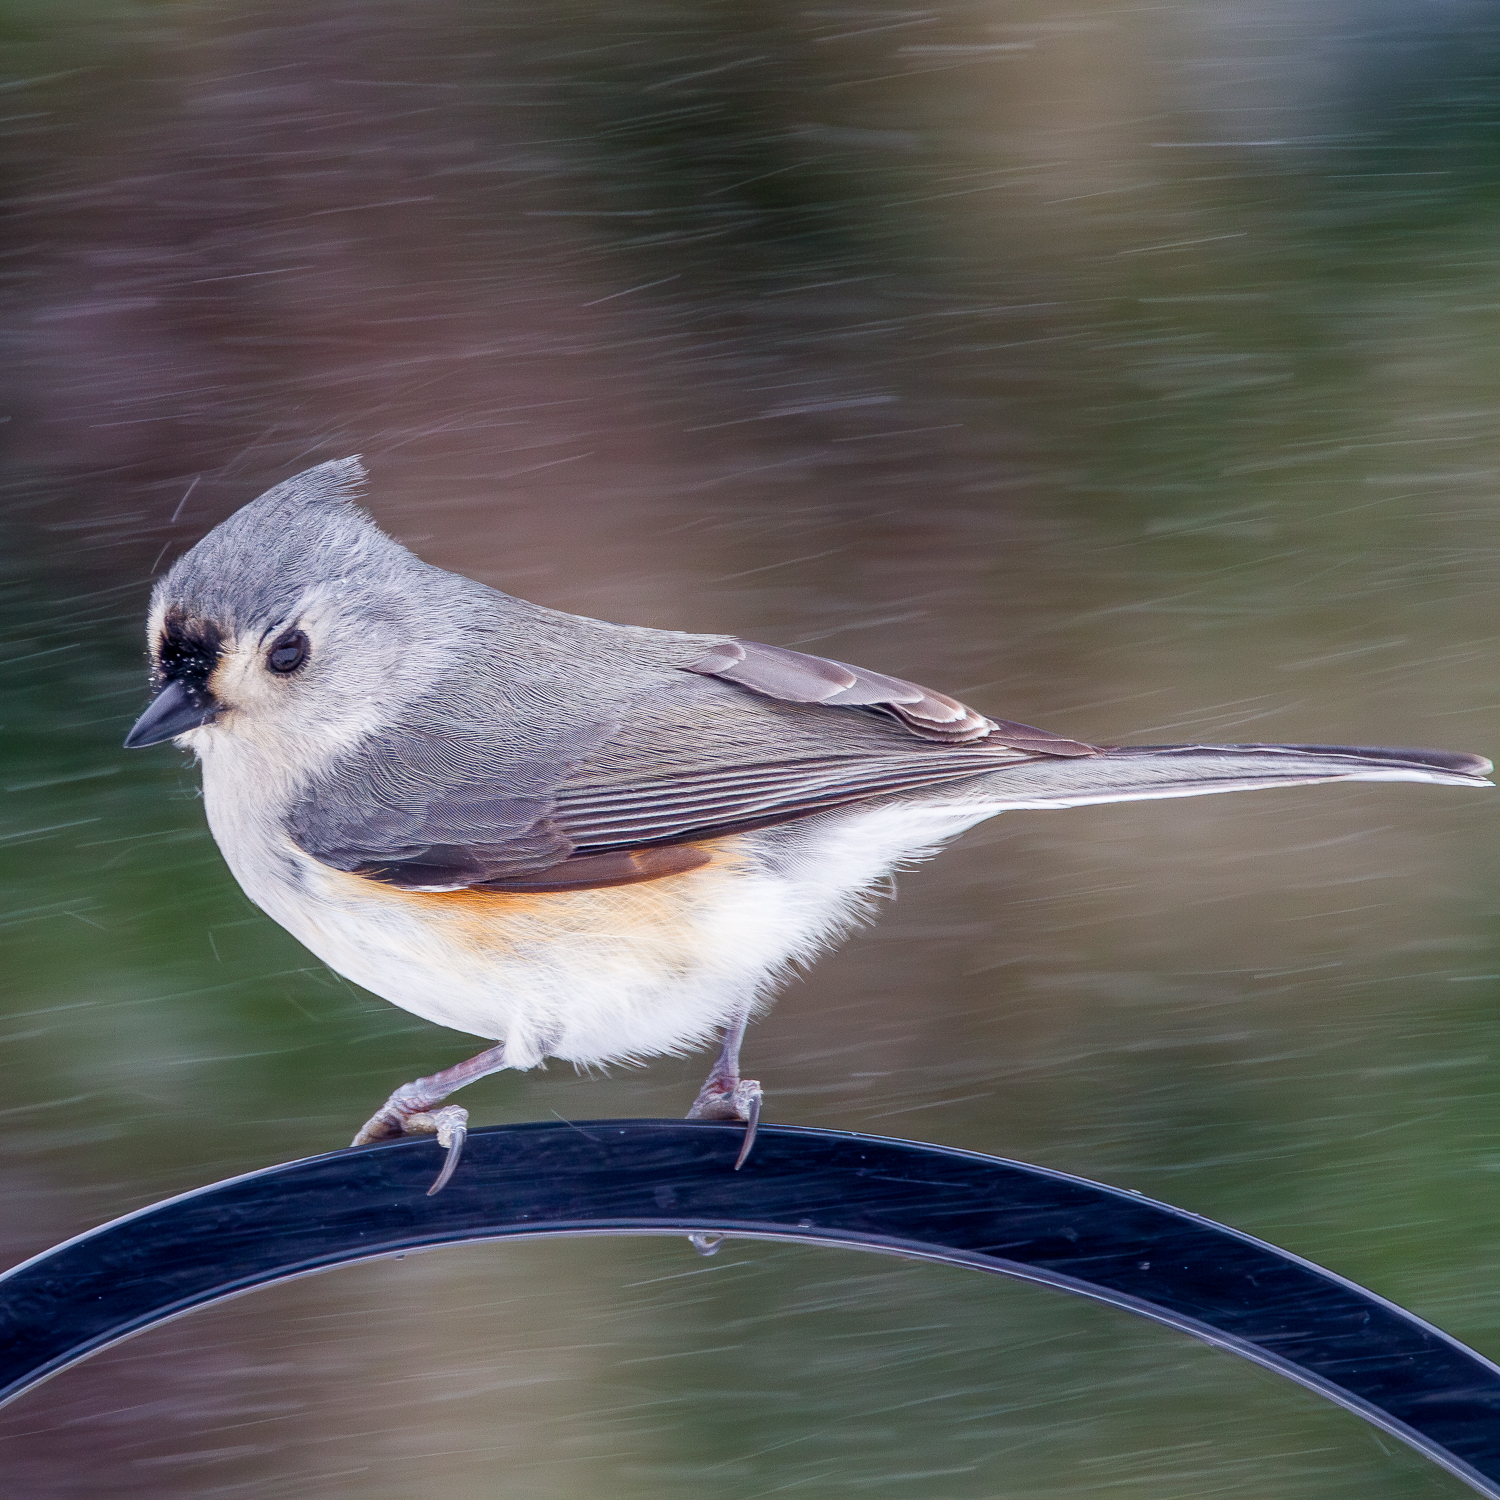 A Tufted Titmouse (Baeolophus bicolor) perches on a feeding station near the shore of Walloon Lake on a winter afternoon.